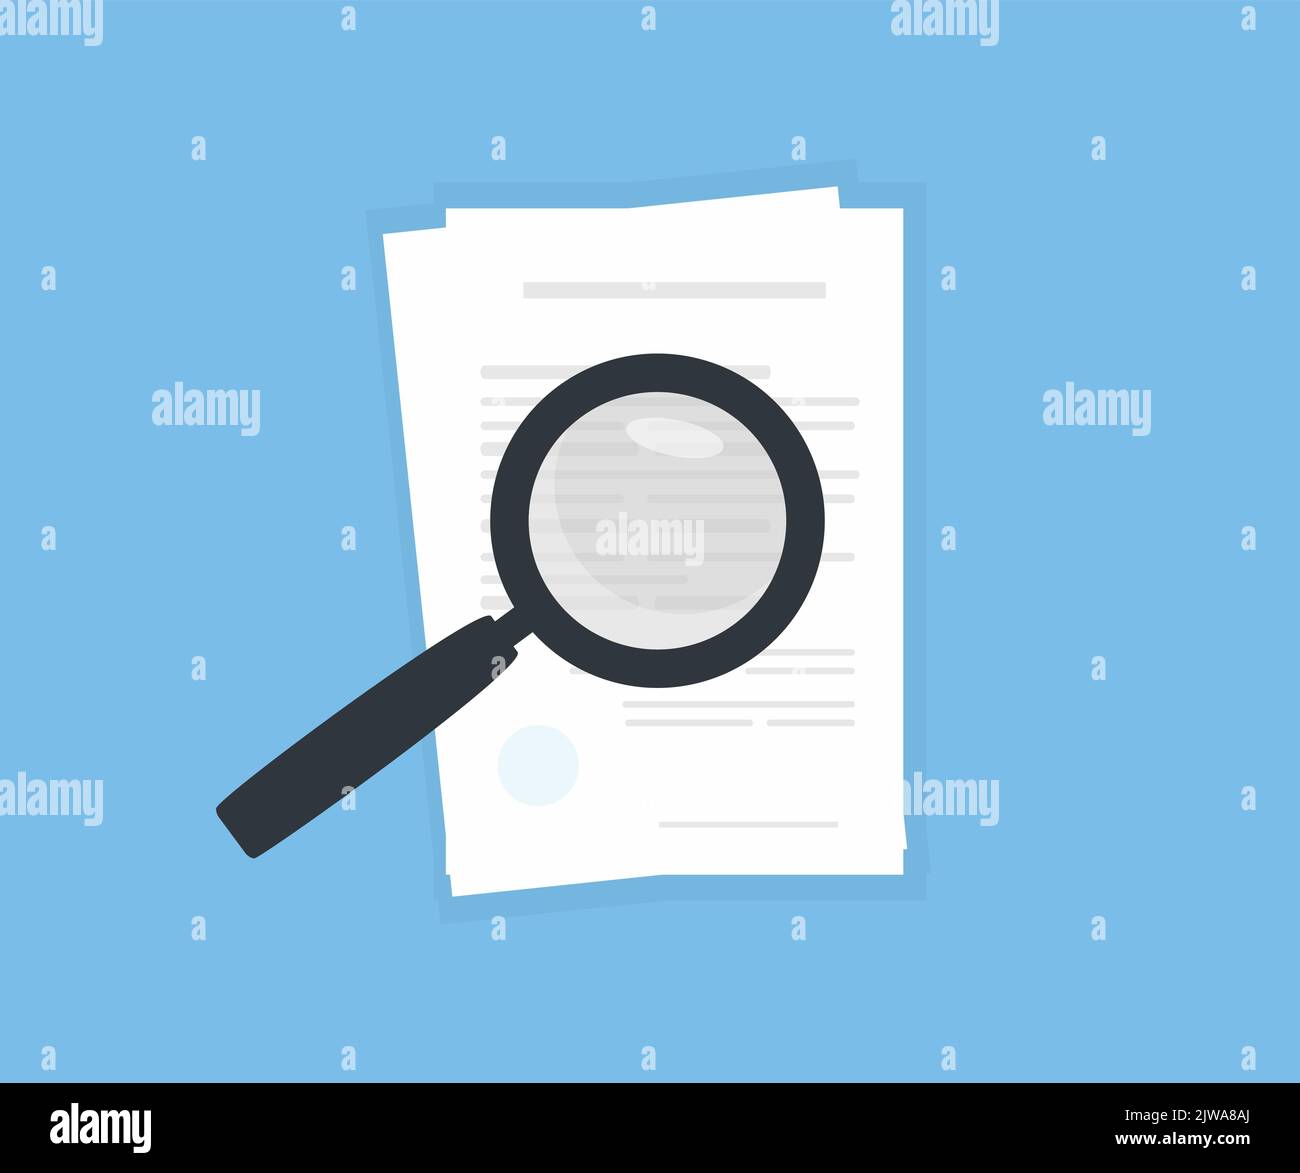 Review quality control, expertise text logo design. Document file evidence check analysis, checklist paper during perform autid, article inspect. Stock Vector